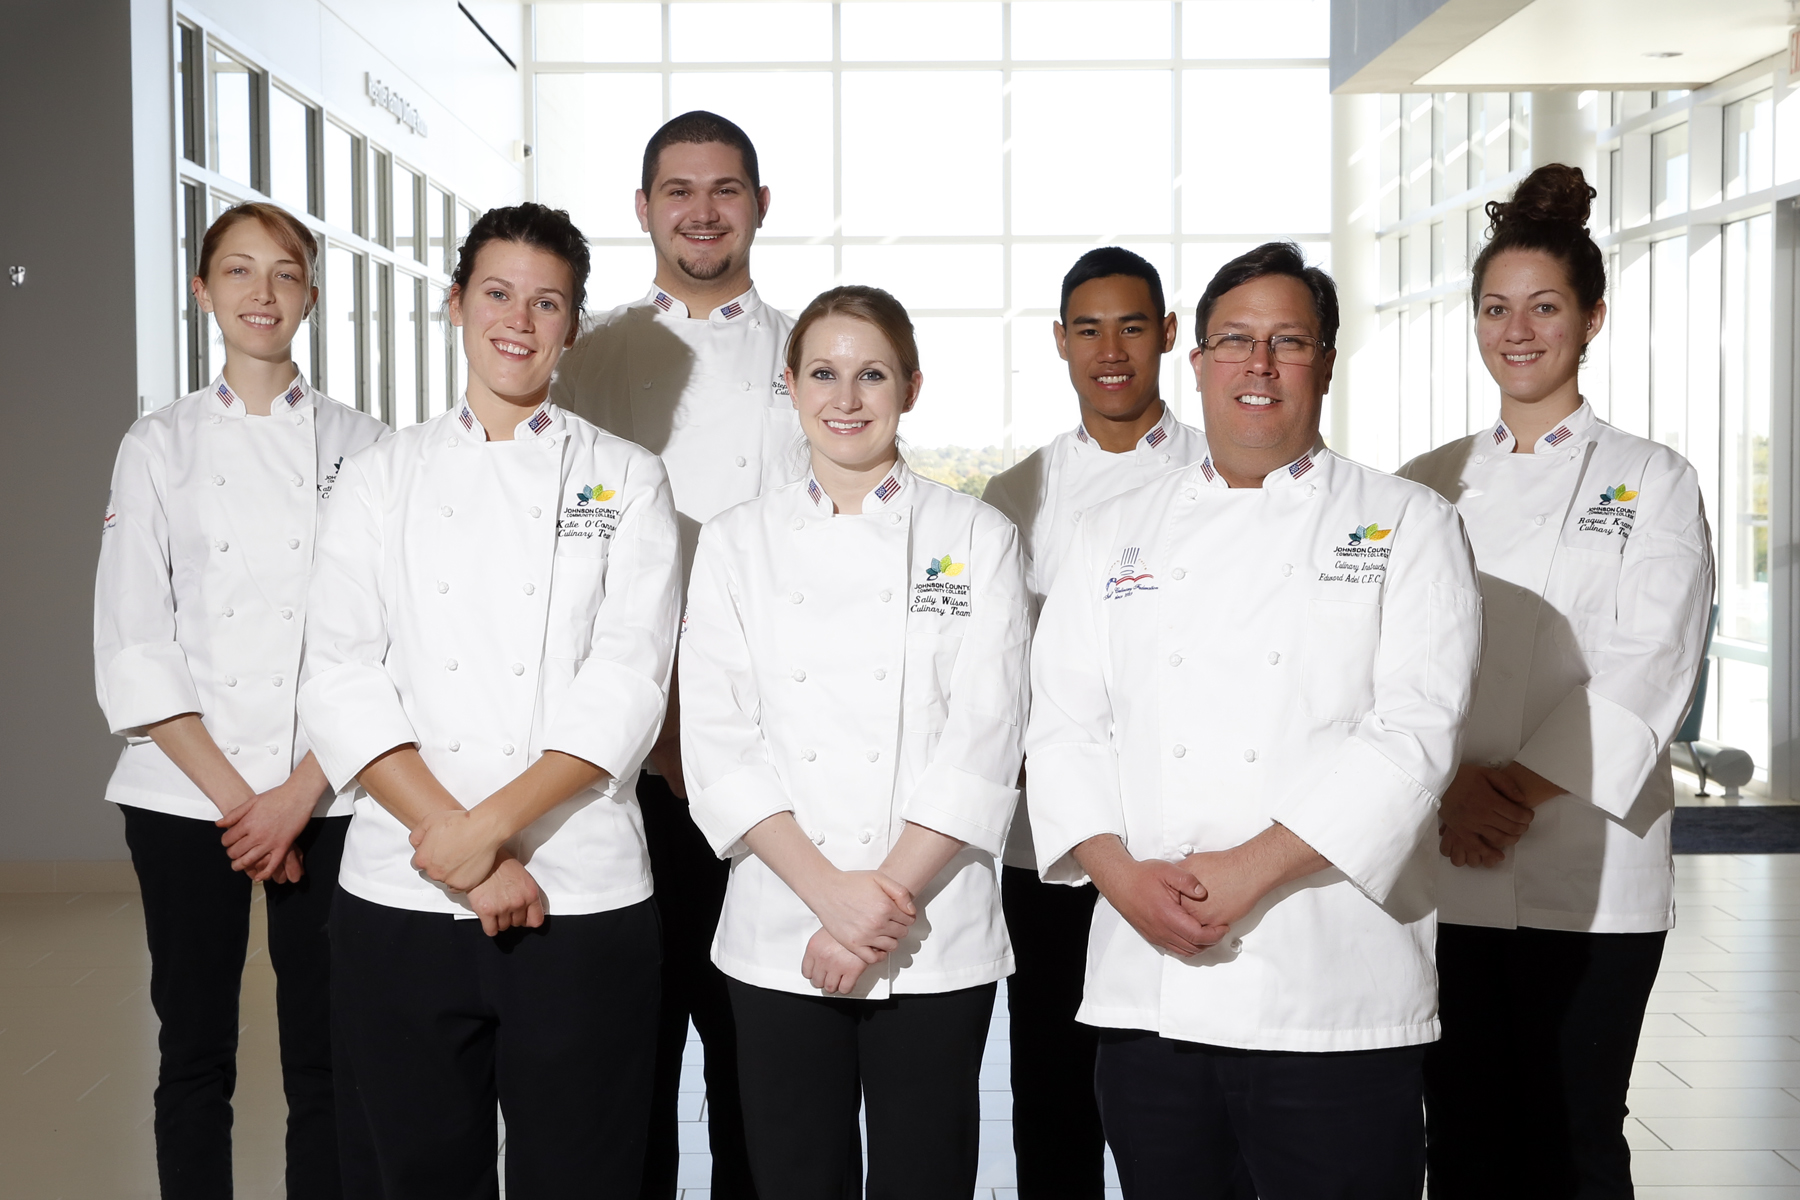 United States of America Young Chefs Team